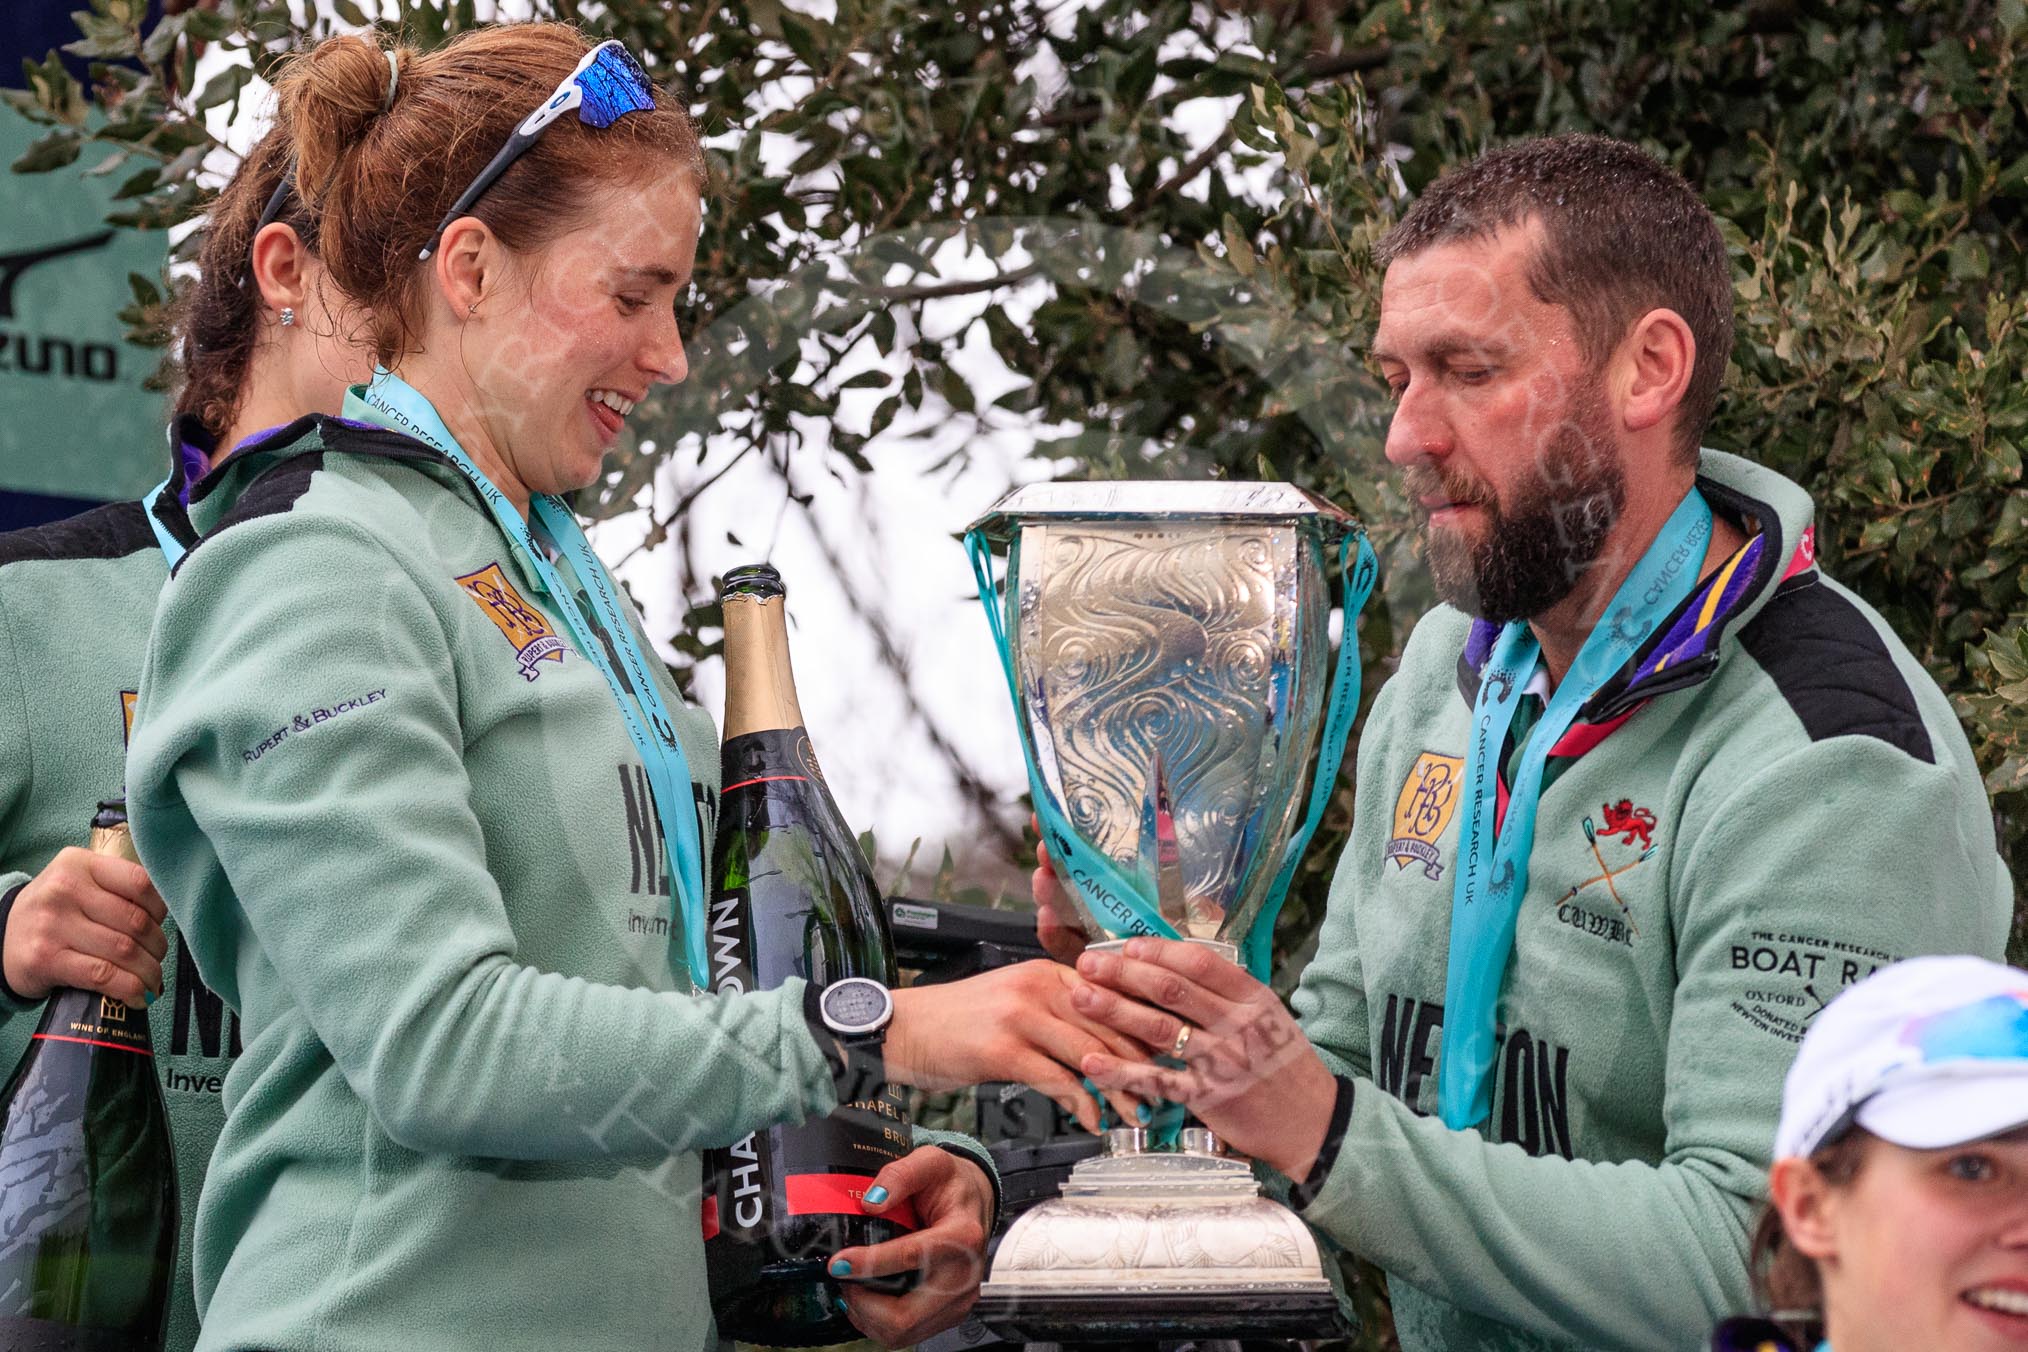 The Cancer Research UK Women's Boat Race 2018: Cambridge 6 seat Alice White with the Women's Boat Race trophy, a bottle of Chapel Down Brut, and Cambridge Head Coach Rob Baker.
River Thames between Putney Bridge and Mortlake,
London SW15,

United Kingdom,
on 24 March 2018 at 17:10, image #305